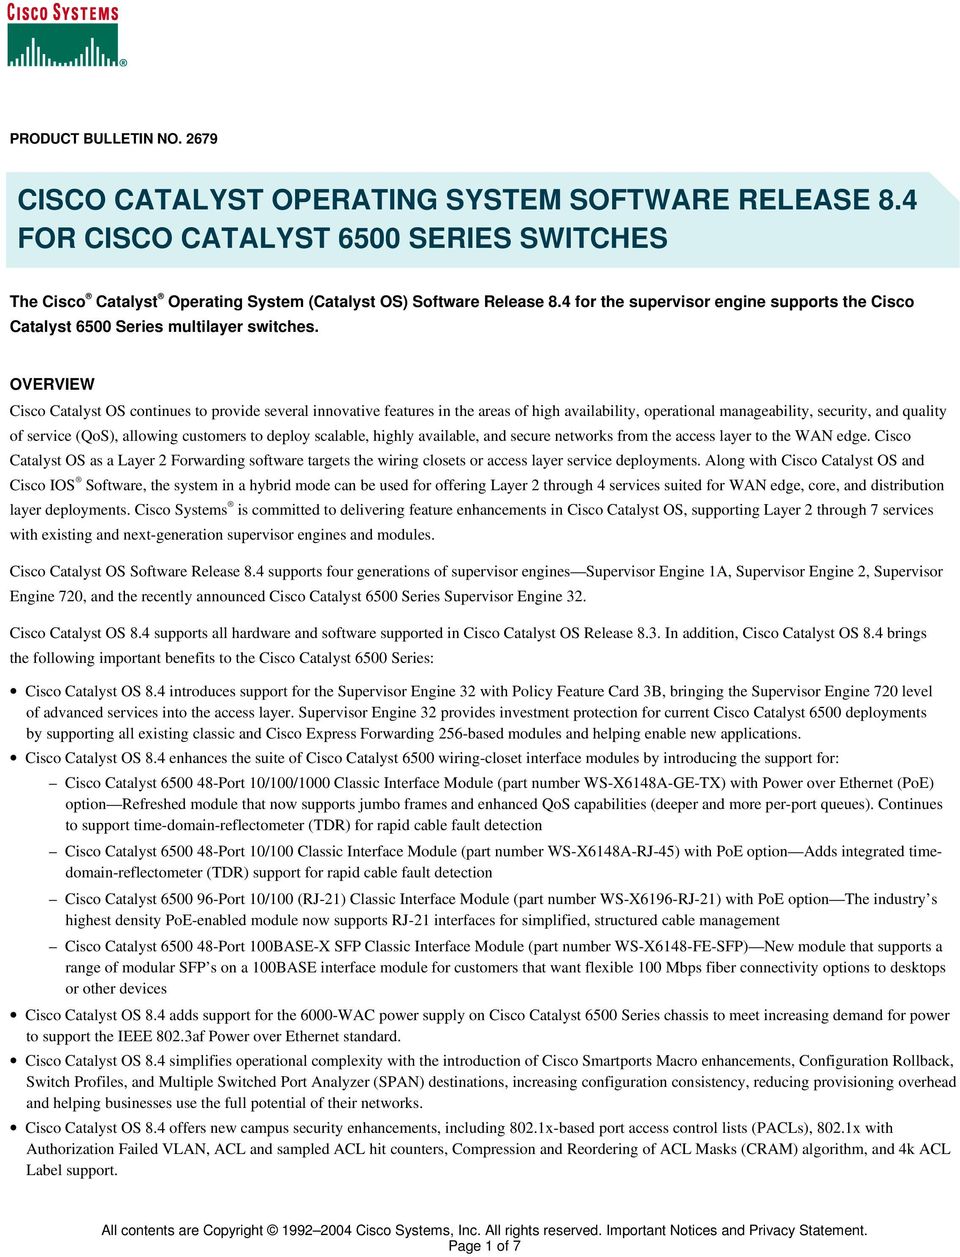 OVERVIEW Cisco Catalyst OS continues to provide several innovative features in the areas of high availability, operational manageability, security, and quality of service (QoS), allowing customers to